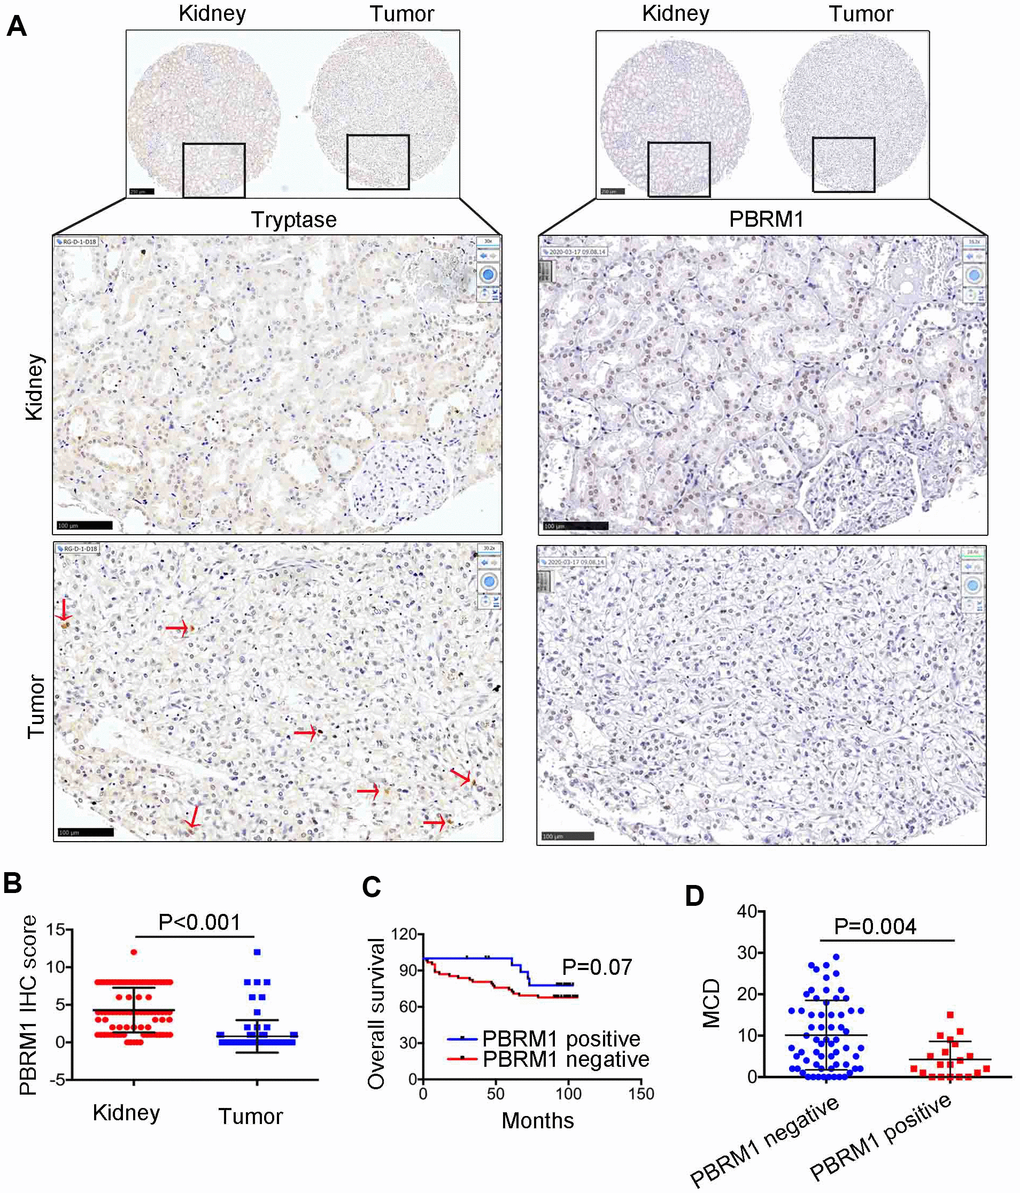 The relationship between PBRM1 protein expression and mast cell infiltration in ccRCC based on IHC analysis. (A) Representative immunohistochemical images show PBRM1- and tryptase-positive mast cells in ccRCC and adjacent normal kidney tissue samples. (B) Dot plot of PBRM1 IHC staining score in adjacent normal kidney tissues (n=83) and ccRCC tissues (n=83). (C) Overall survival of ccRCC patients with PBRM1 IHC staining negative group (n=65) or PBRM1 IHC staining positive group (n=20). (D) Pearson correlation analysis shows the association between PBRM1 expression and mast cell infiltration in 85 out of 90 ccRCC patient tumor tissue samples. Data for five tumor tissues is not included (missing the tissues in TMA). Note: Statistical significance was based on Student’s t-test.